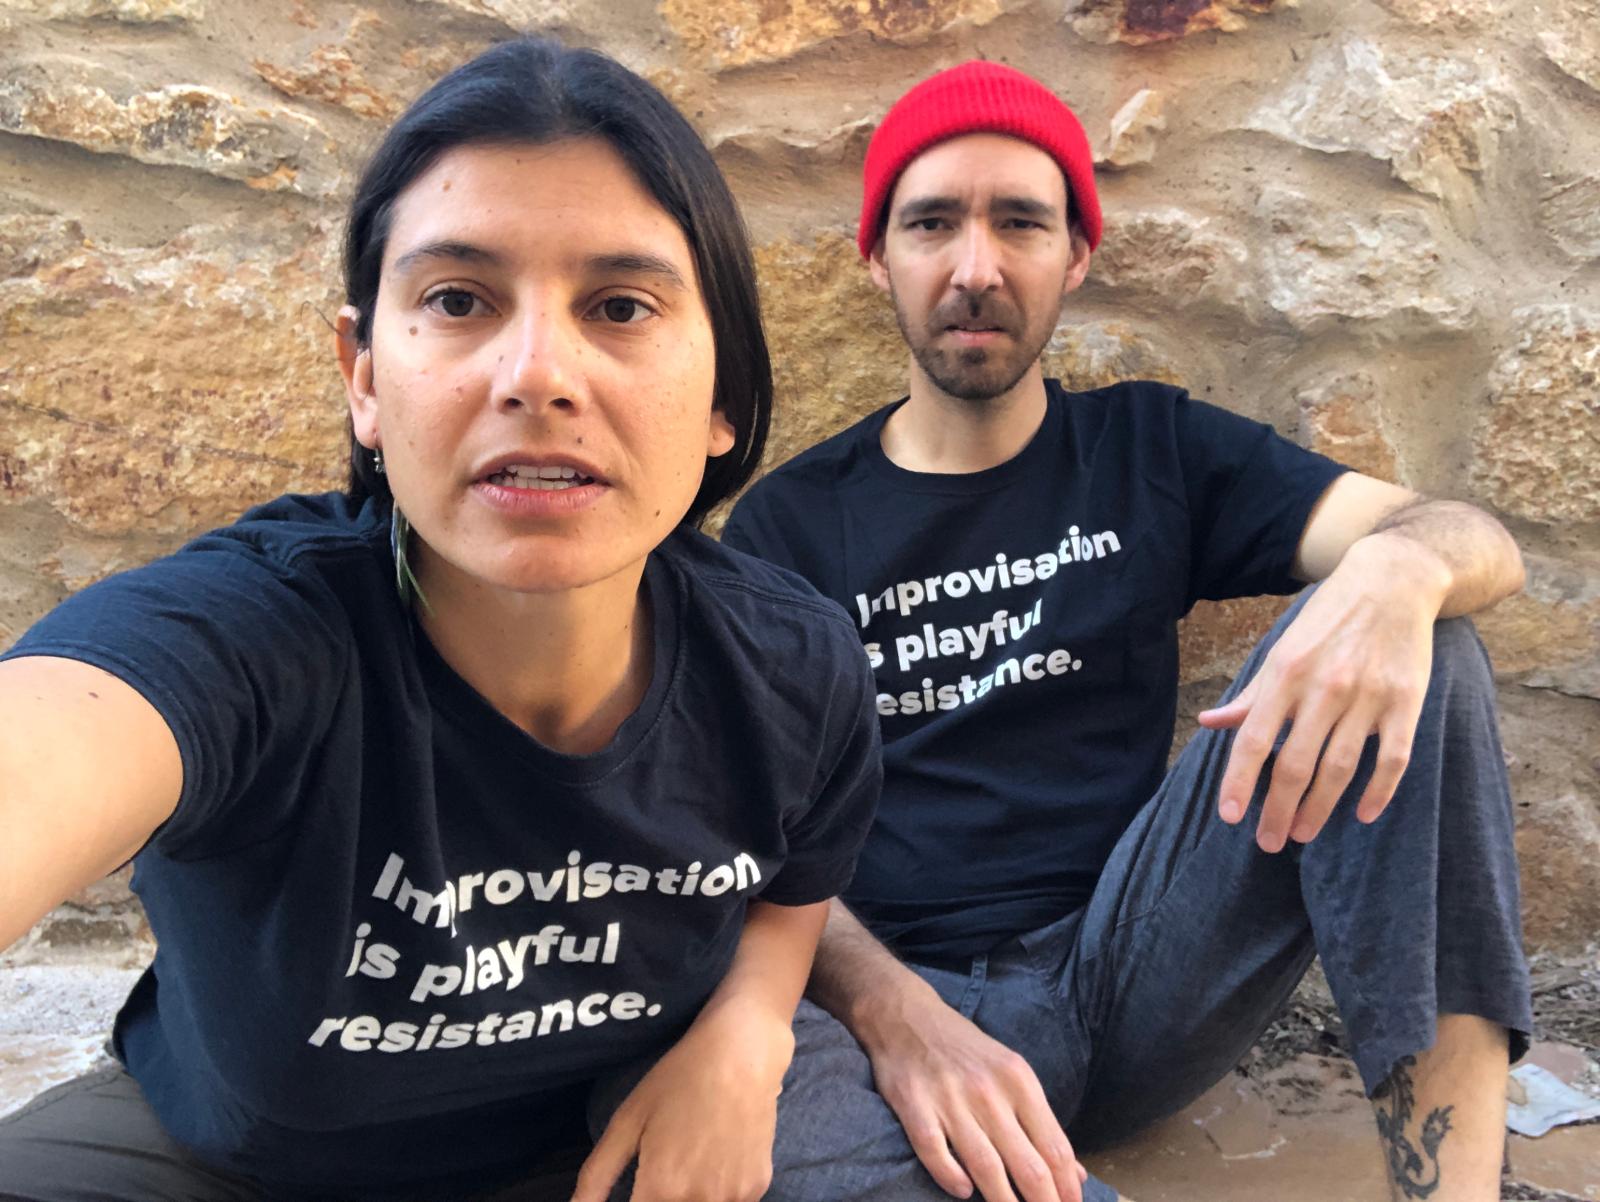 A woman and a man seated against a rocky wall, both wearing T-shirts with the text "Improvisation is playful resistance".